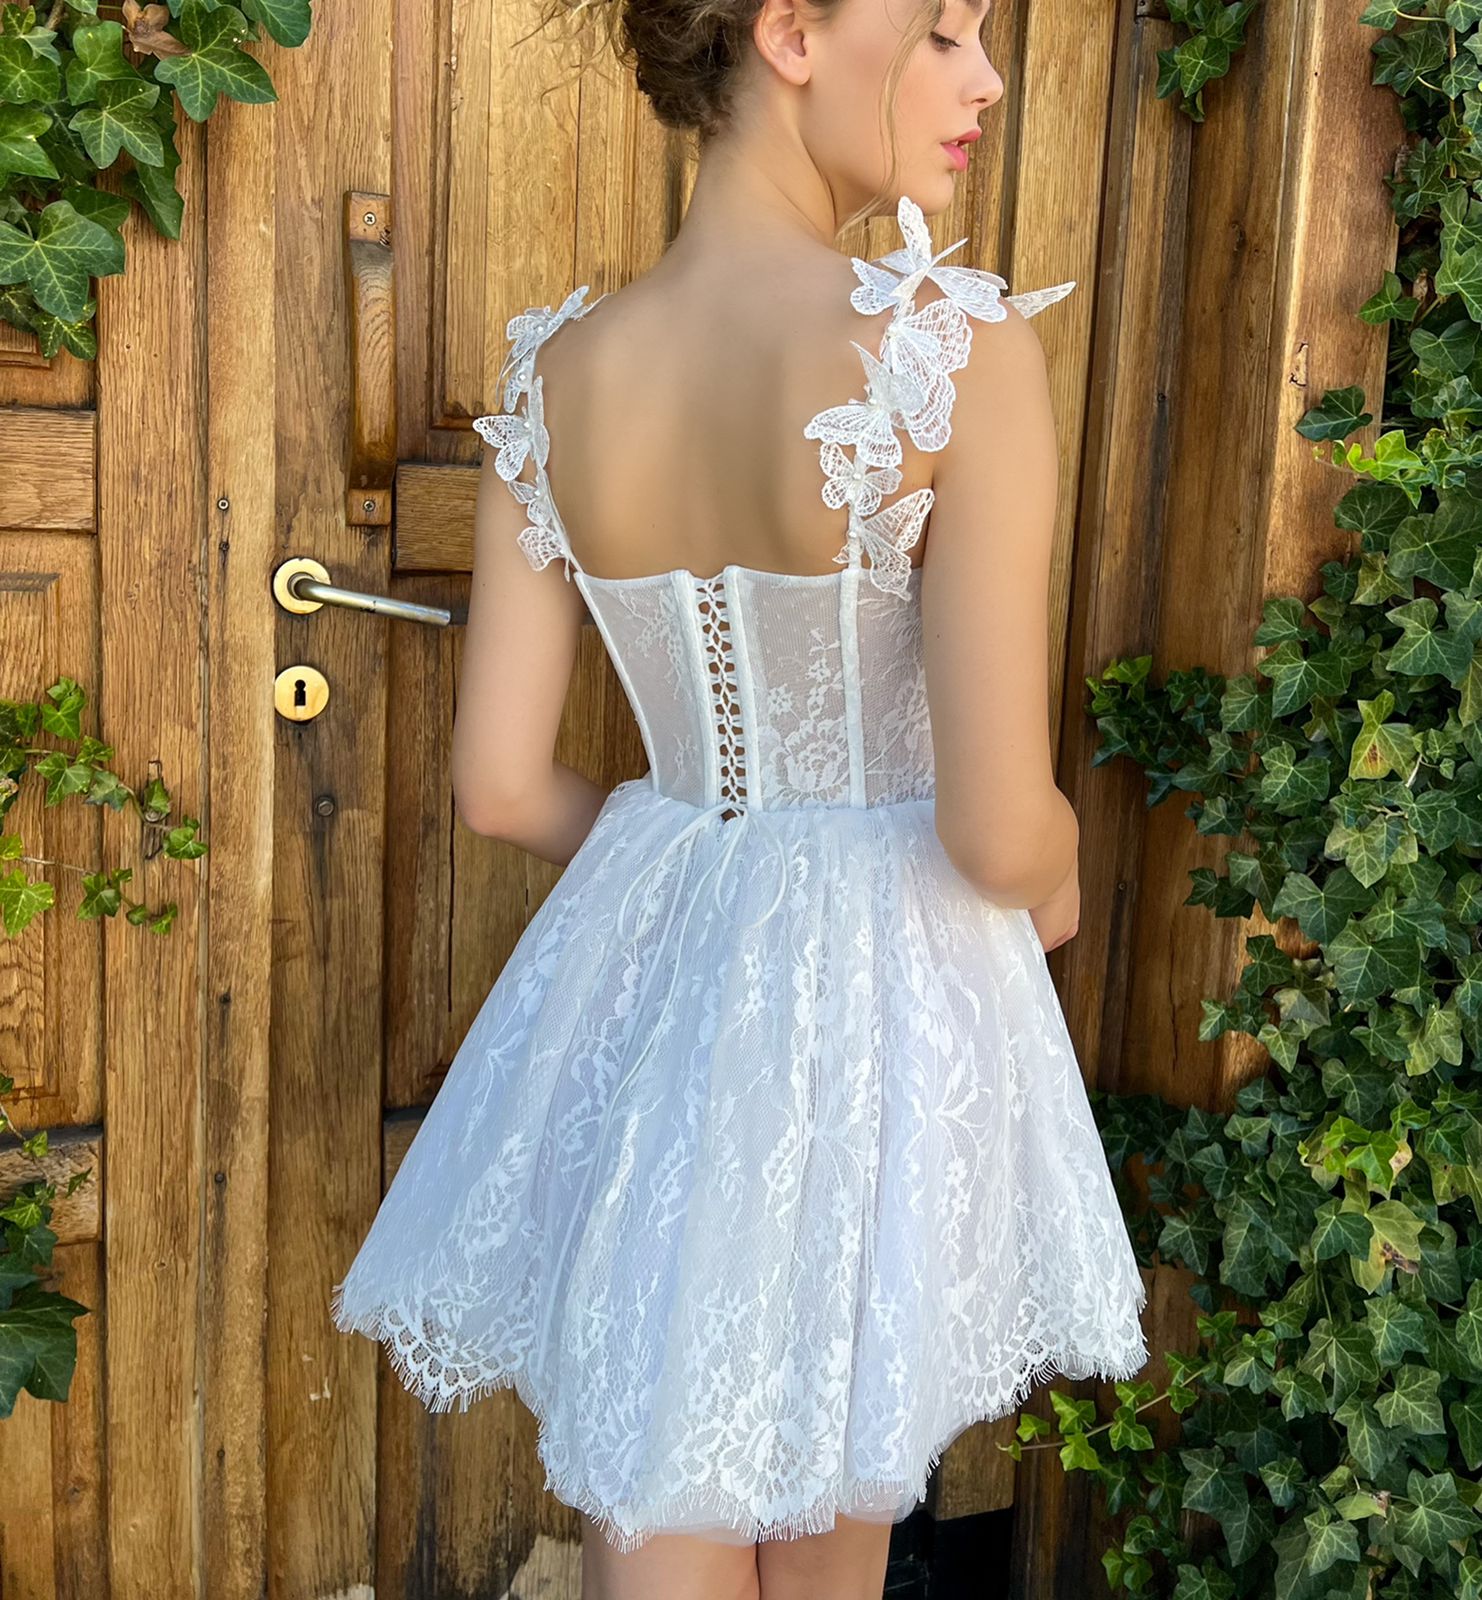 White mini dress with spaghetti straps, embroidery and butterflies